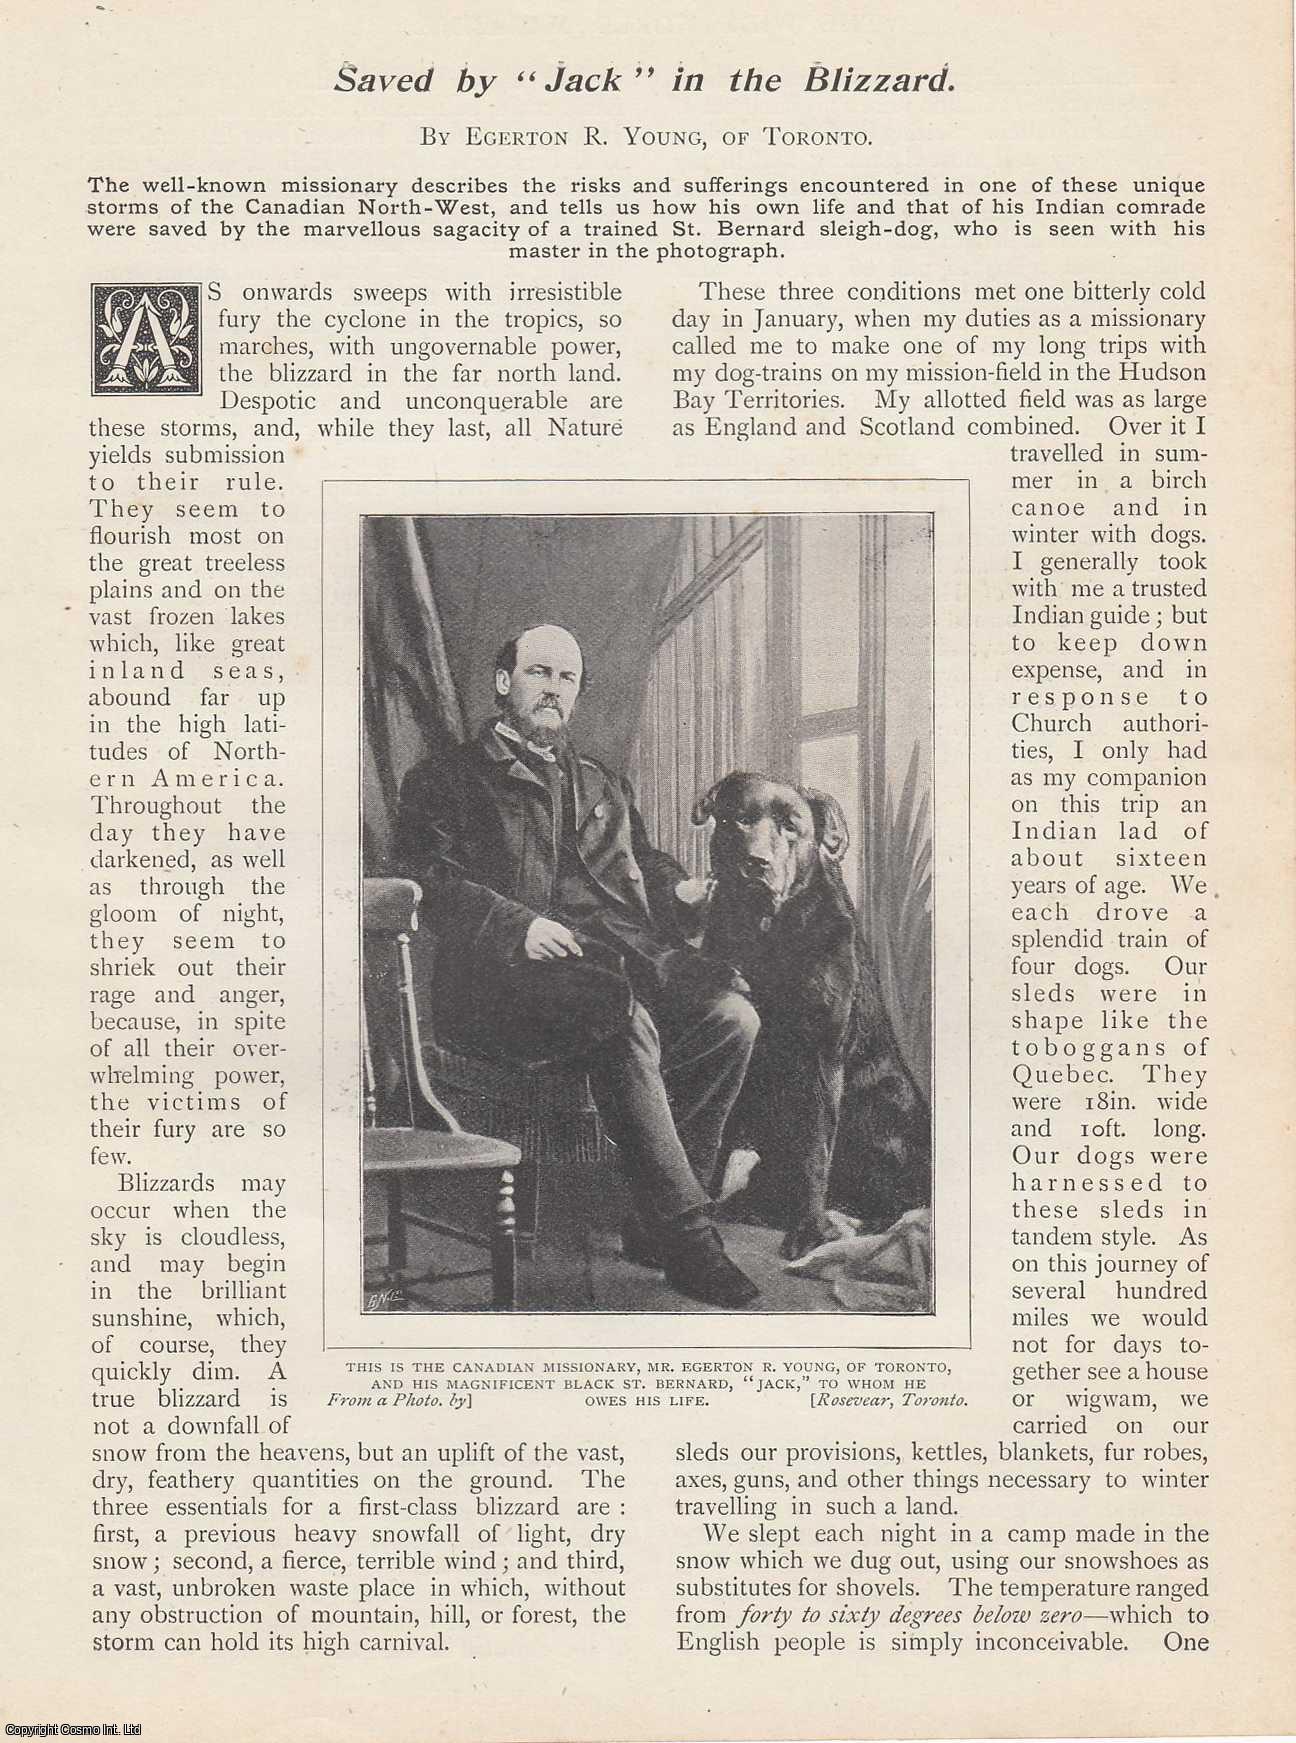 Egerton R. Young, of Toronto - Saved by Jack in the Blizzard. The author and his companion saved by a St. Bernard Sleigh Dog in the Canadian North West. An uncommon original article from the Wide World Magazine, 1899.